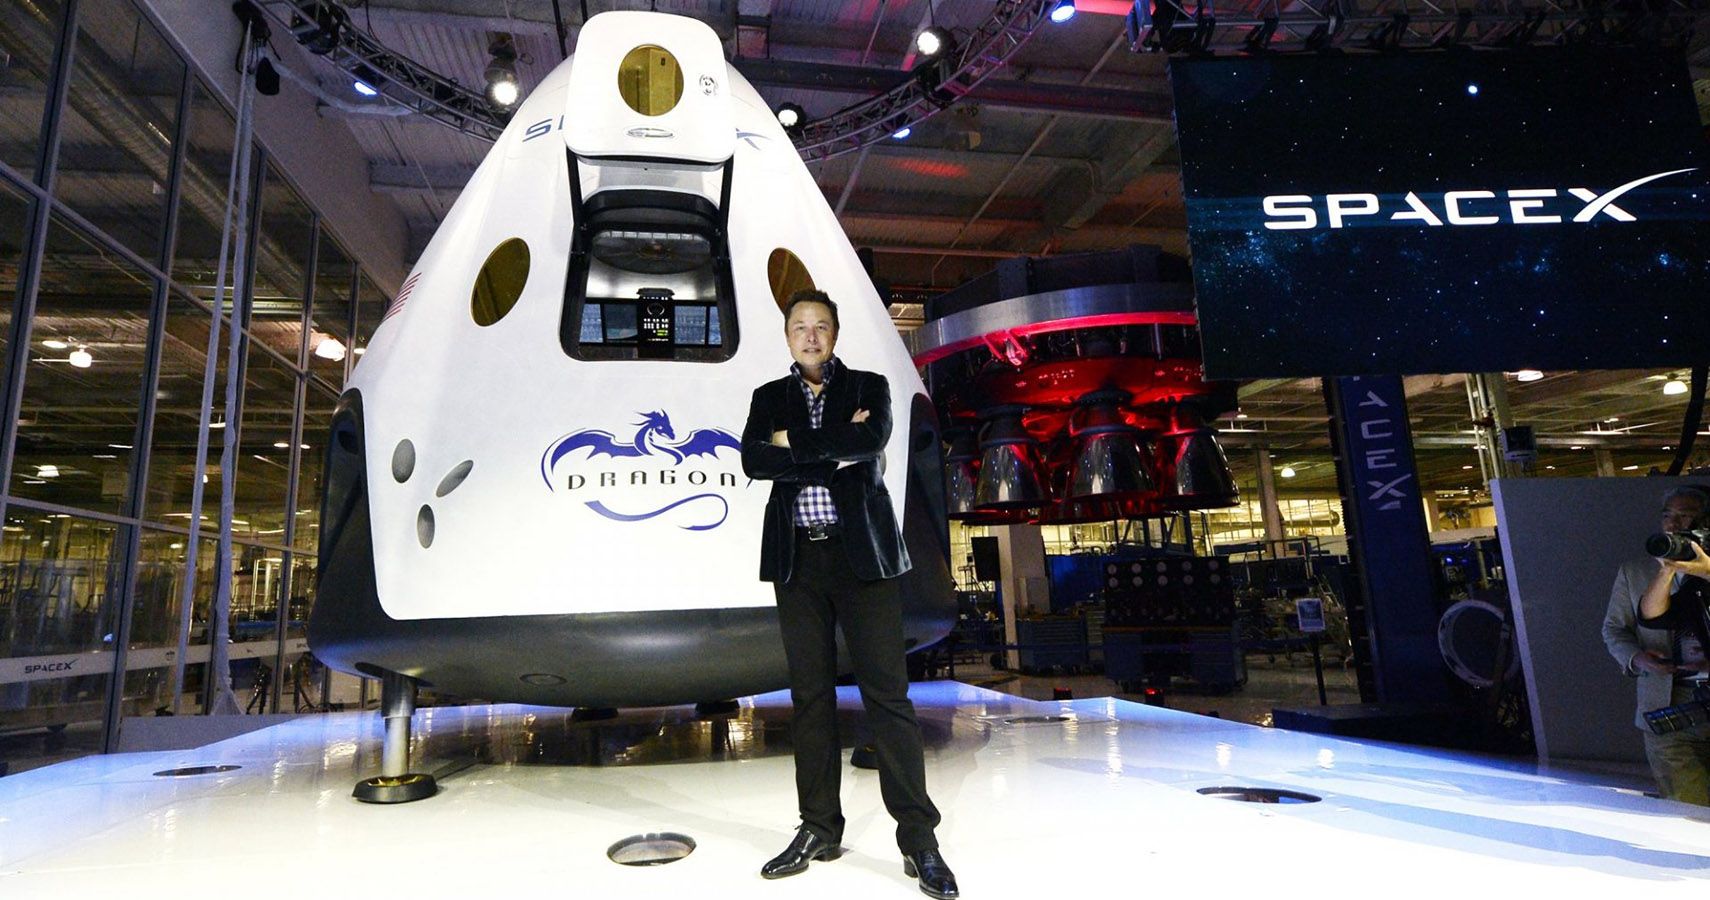 People Laughed At SpaceX, And Even His Youngest Son’s Name But Elon Musk Lives In The Future, Planning A Century Ahead, Rather Than Just Years